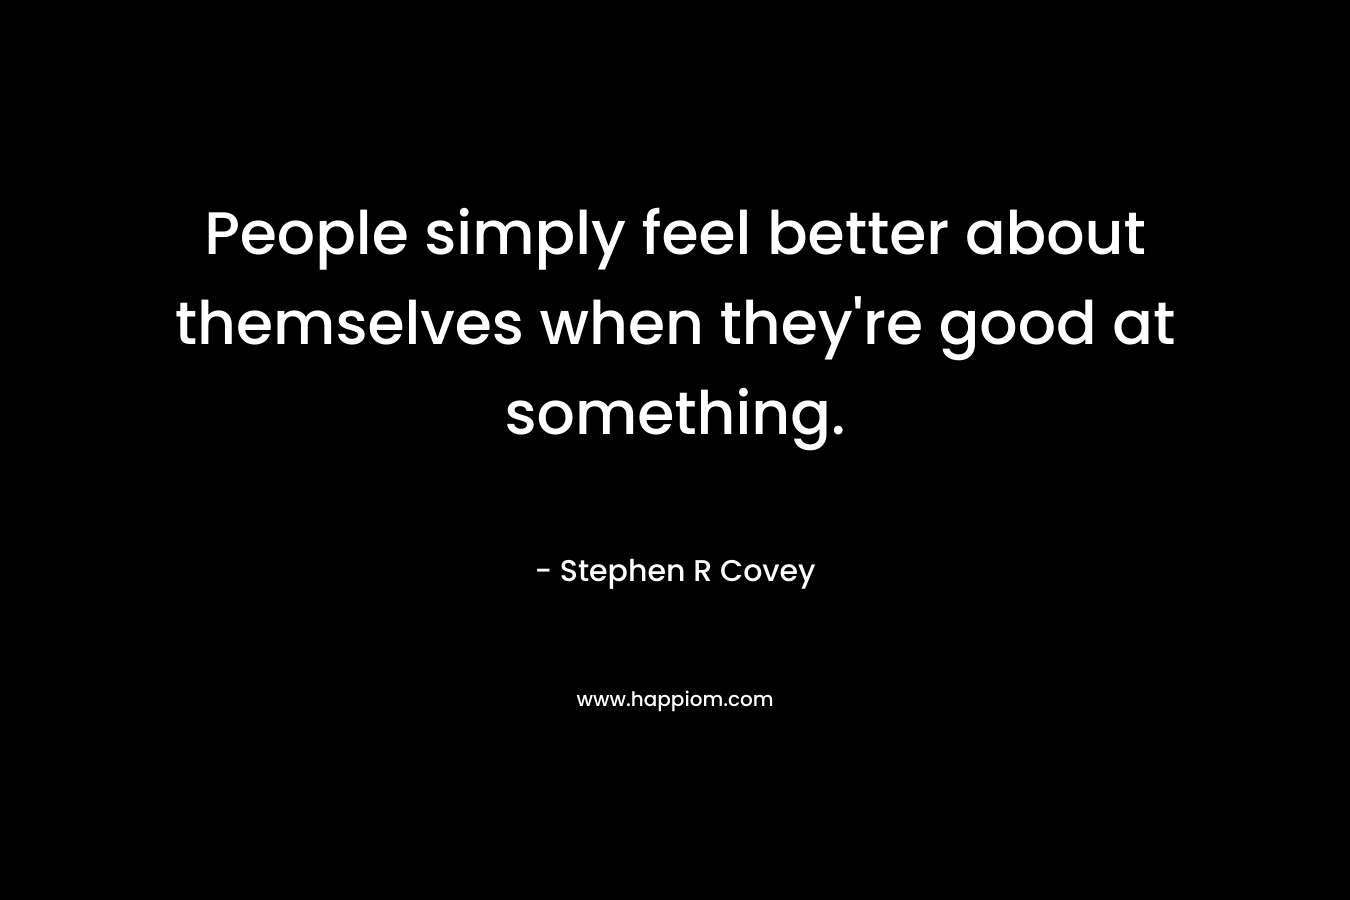 People simply feel better about themselves when they're good at something.